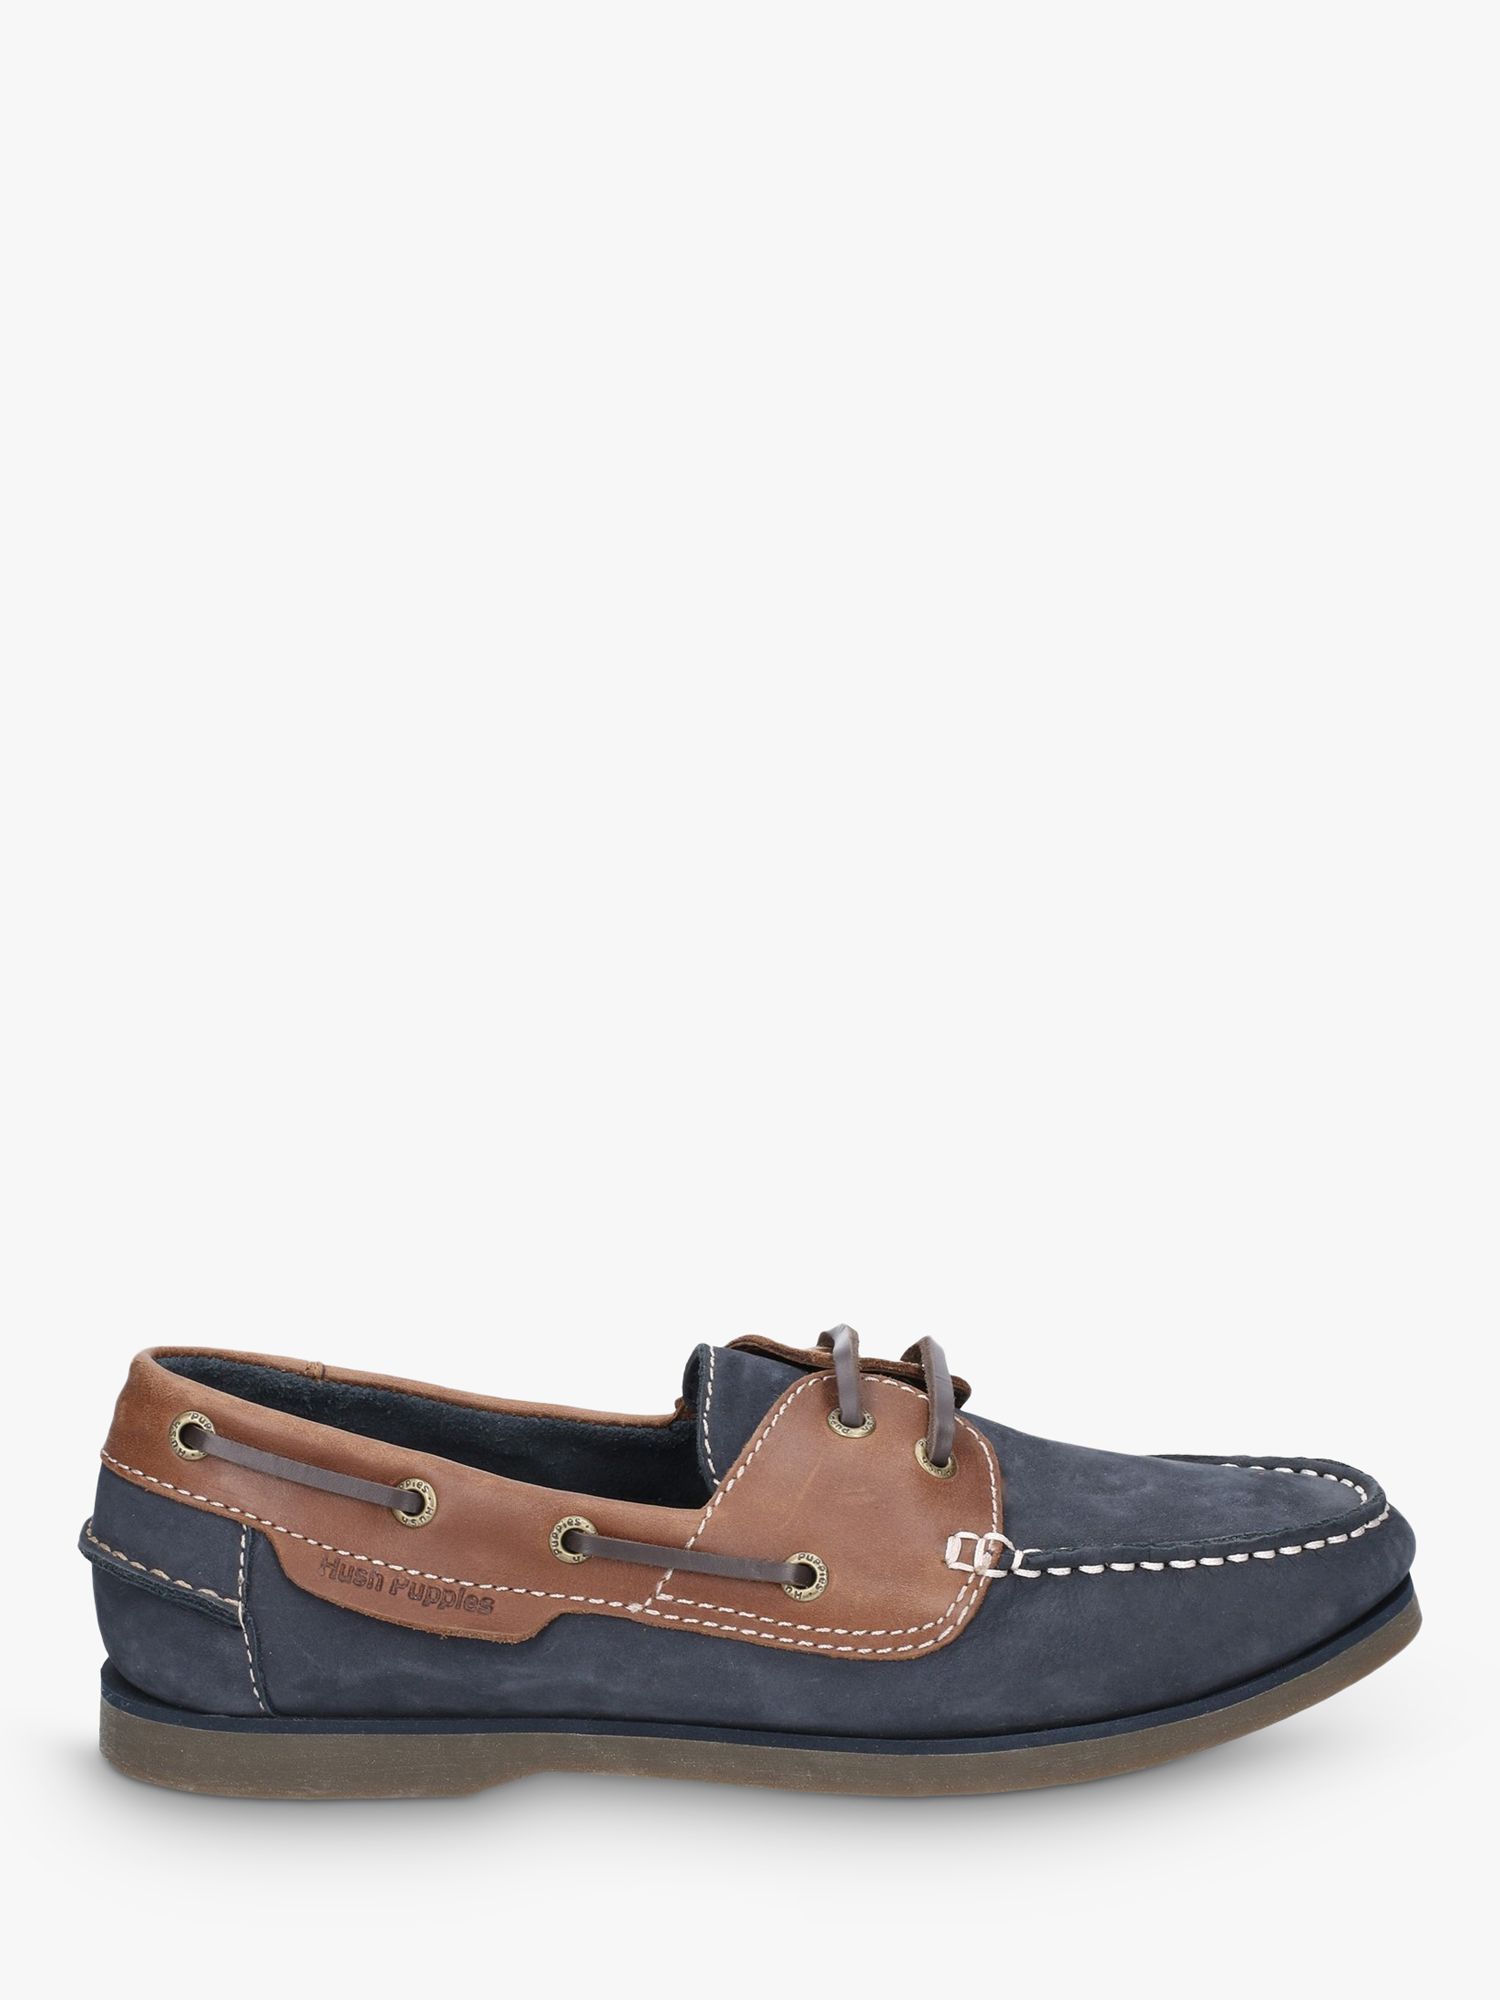 Hush Puppies Henry Leather Boat Shoe, Blue at John Lewis & Partners